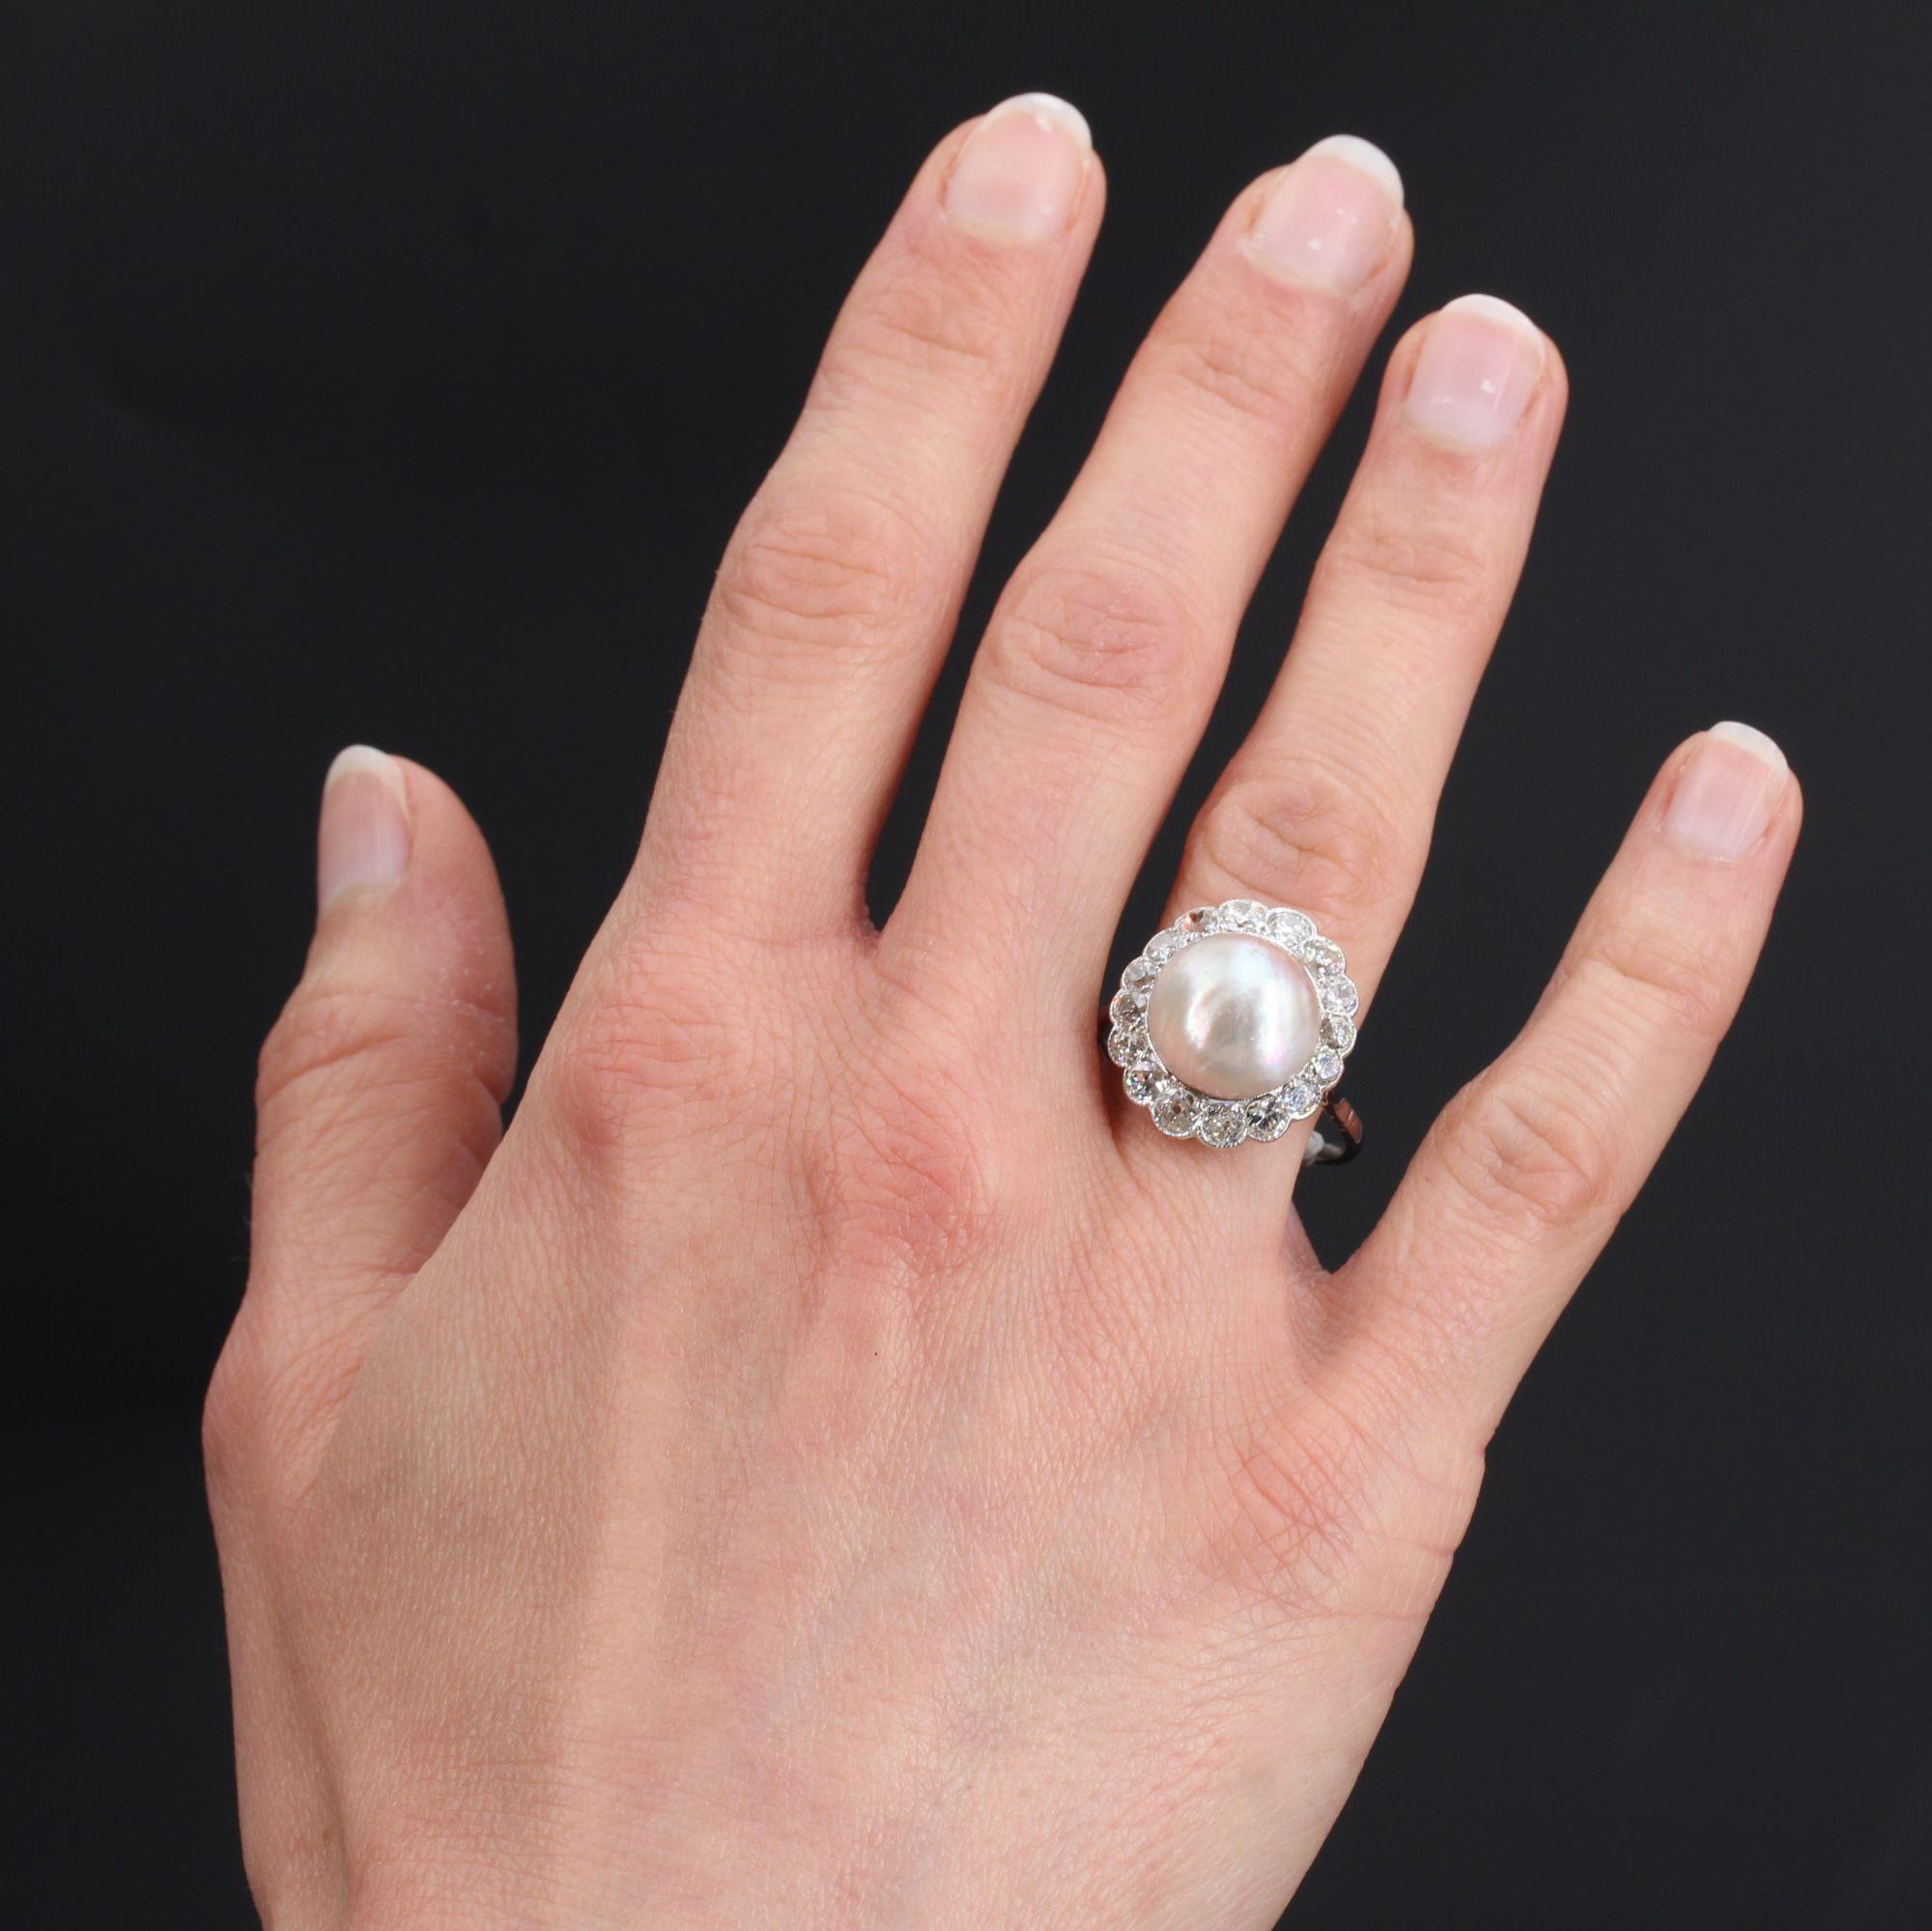 Ring in 18 karat white gold, owl hallmark.
Sublime and important antique ring, it is adorned with a mabe pearl with iridescent white-pink orient, in a setting of antique cushion-cut diamonds. The setting is beautifully openworked.
Diameter of the